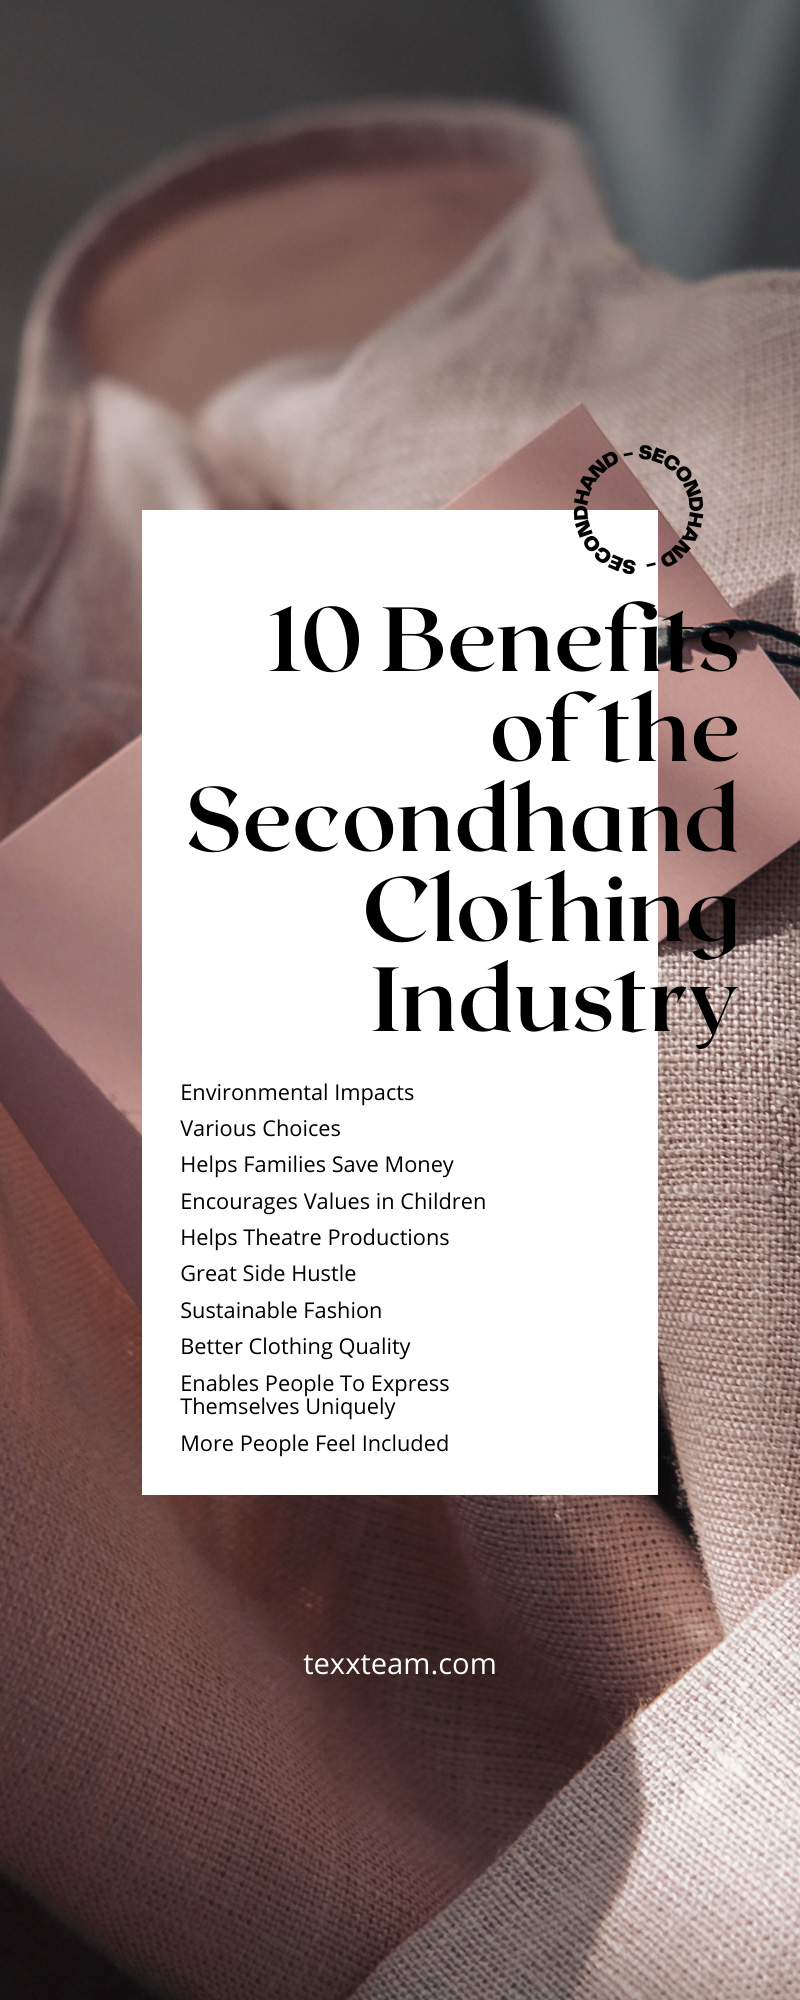 10 Benefits of the Secondhand Clothing Industry